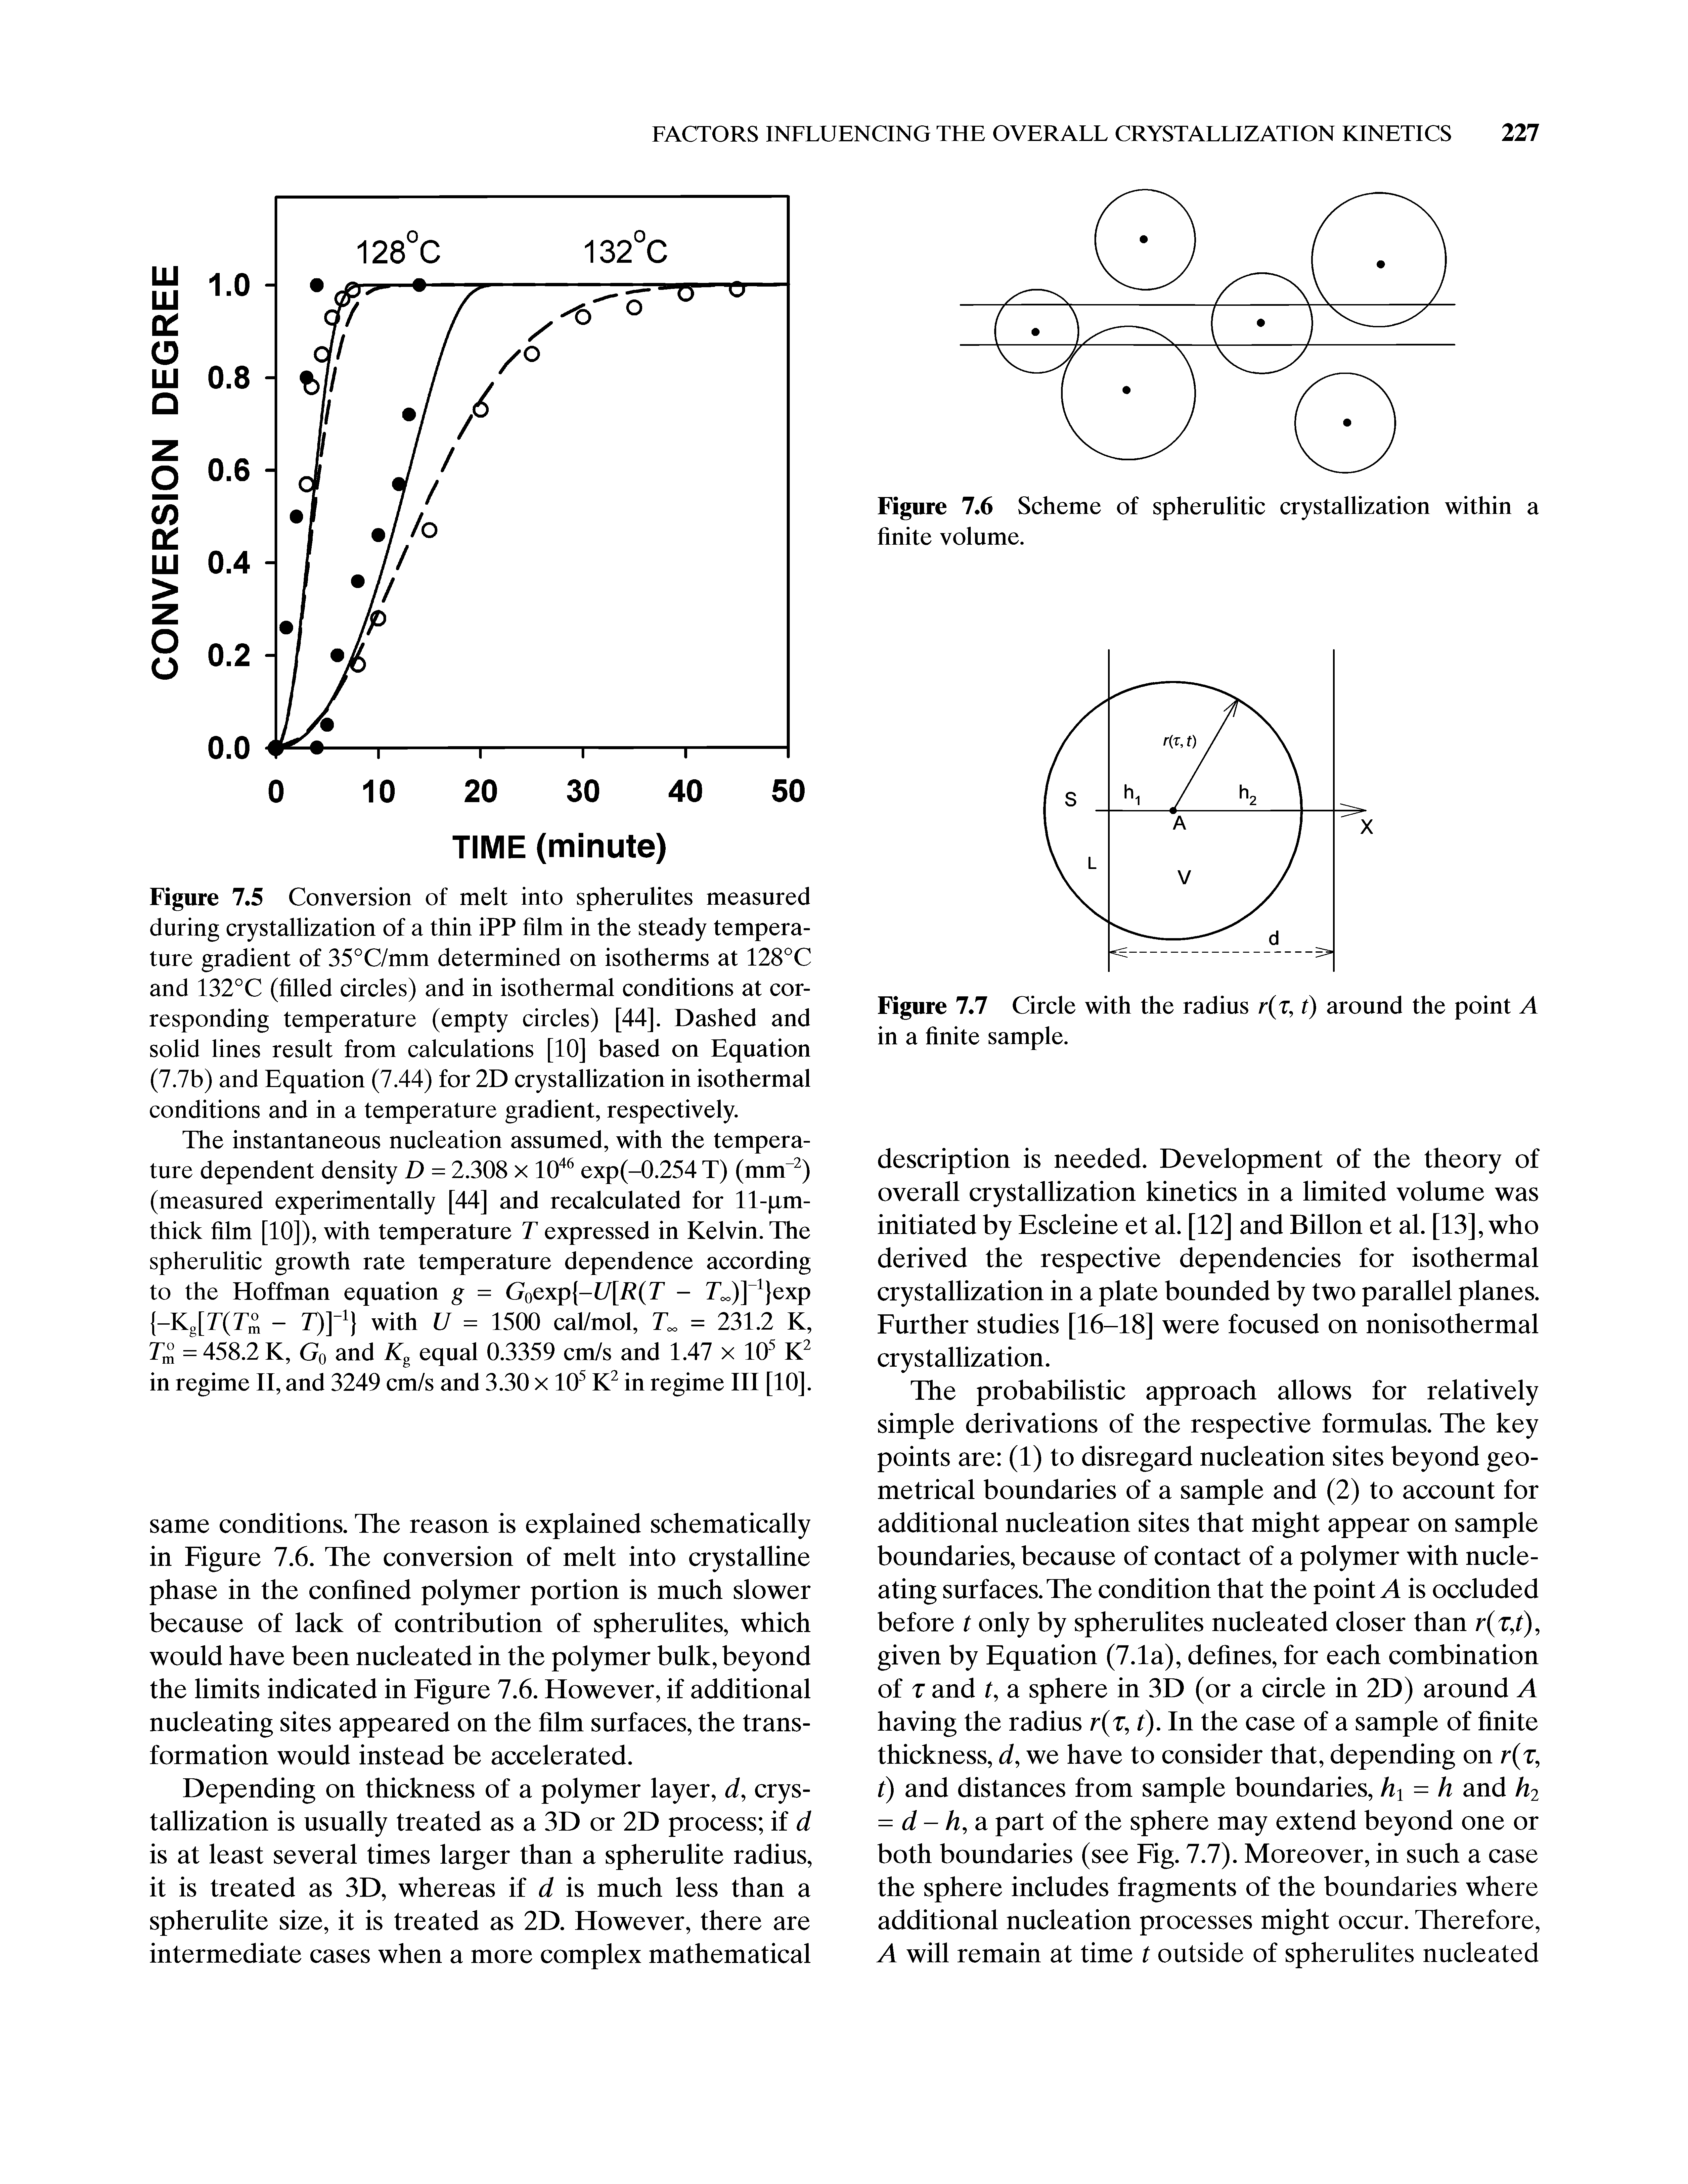 Figure 7.5 Conversion of melt into spherulites measured during crystallization of a thin iPP film in the steady temperature gradient of 35°C/mm determined on isotherms at 128 C and 132°C (filled circles) and in isothermal conditions at corresponding temperature (empty circles) [44]. Dashed and solid lines result from calculations [10] based on Equation (7.7b) and Equation (7.44) for 2D crystallization in isothermal conditions and in a temperature gradient, respectively.